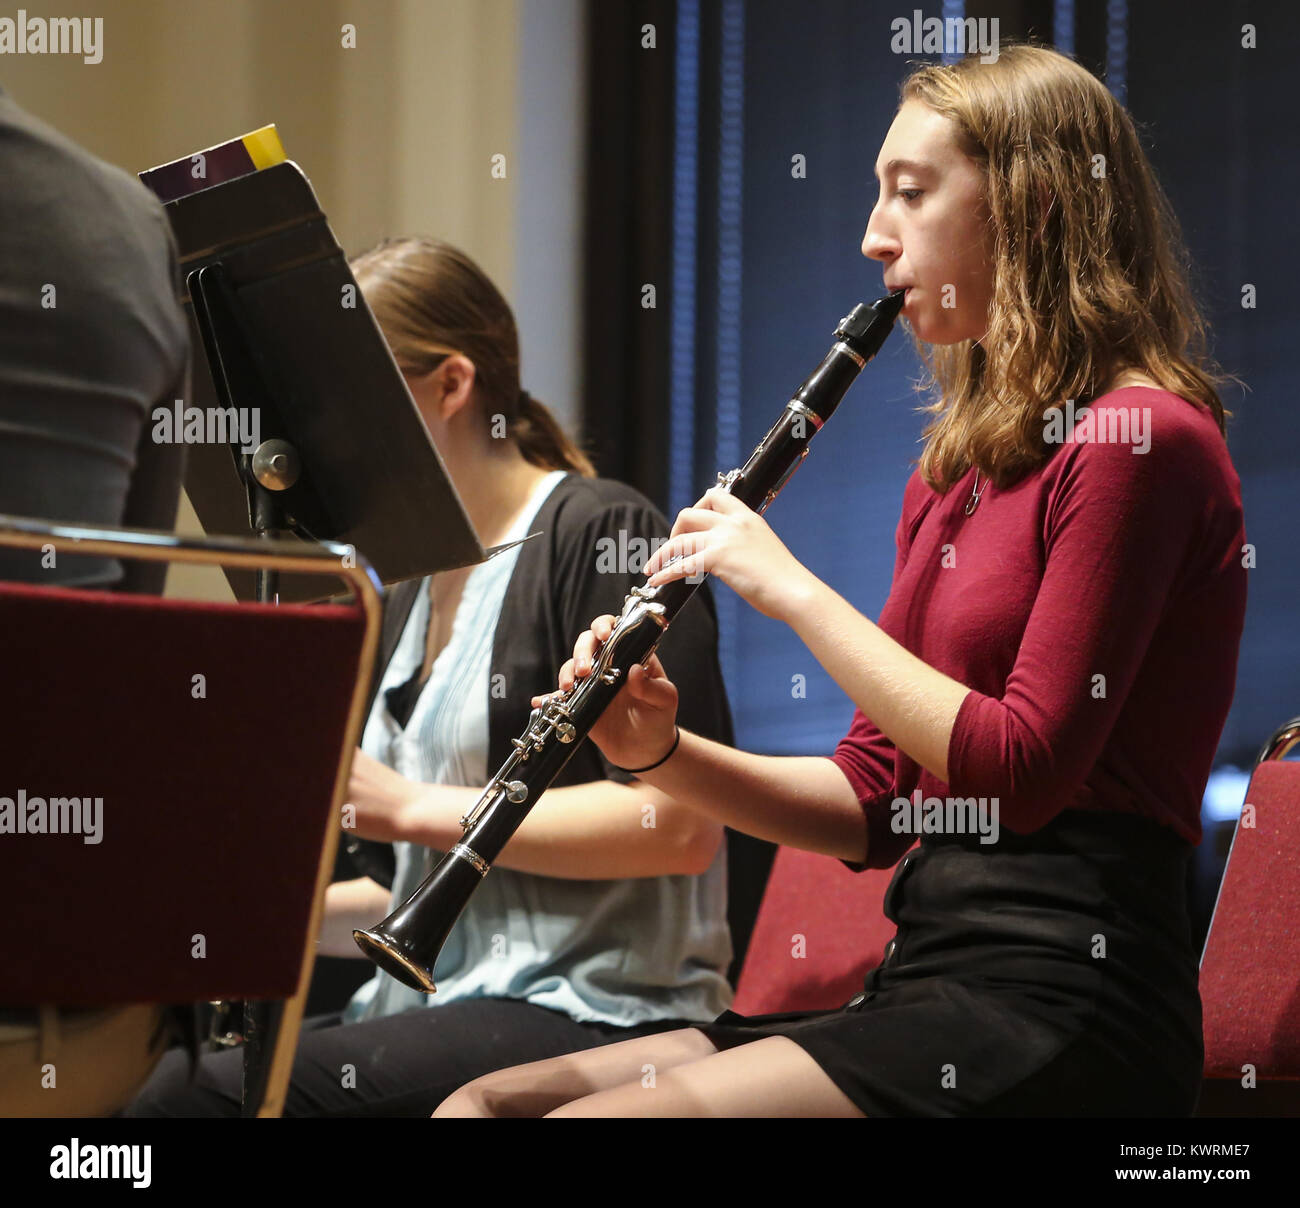 Rock Island, Iowa, USA. 22nd Jan, 2017. Clarinetist Cora Habeger plays Prelude in C, BWV 943 composed by Johann S. Bach and Nicholas J. Contorno in Wallenberg Hall at Augustana College in Rock Island on Sunday, January 22, 2017. The Augustana Clarinet Studio presented a recital to benefit Clarinets for Conservation (the Daraja Music Initiative), an organization that strives to preserve the mpingo tree, which is used to make clarinets as well as promoting sustainability through music education in Tanzania. Credit: Andy Abeyta/Quad-City Times/ZUMA Wire/Alamy Live News Stock Photo